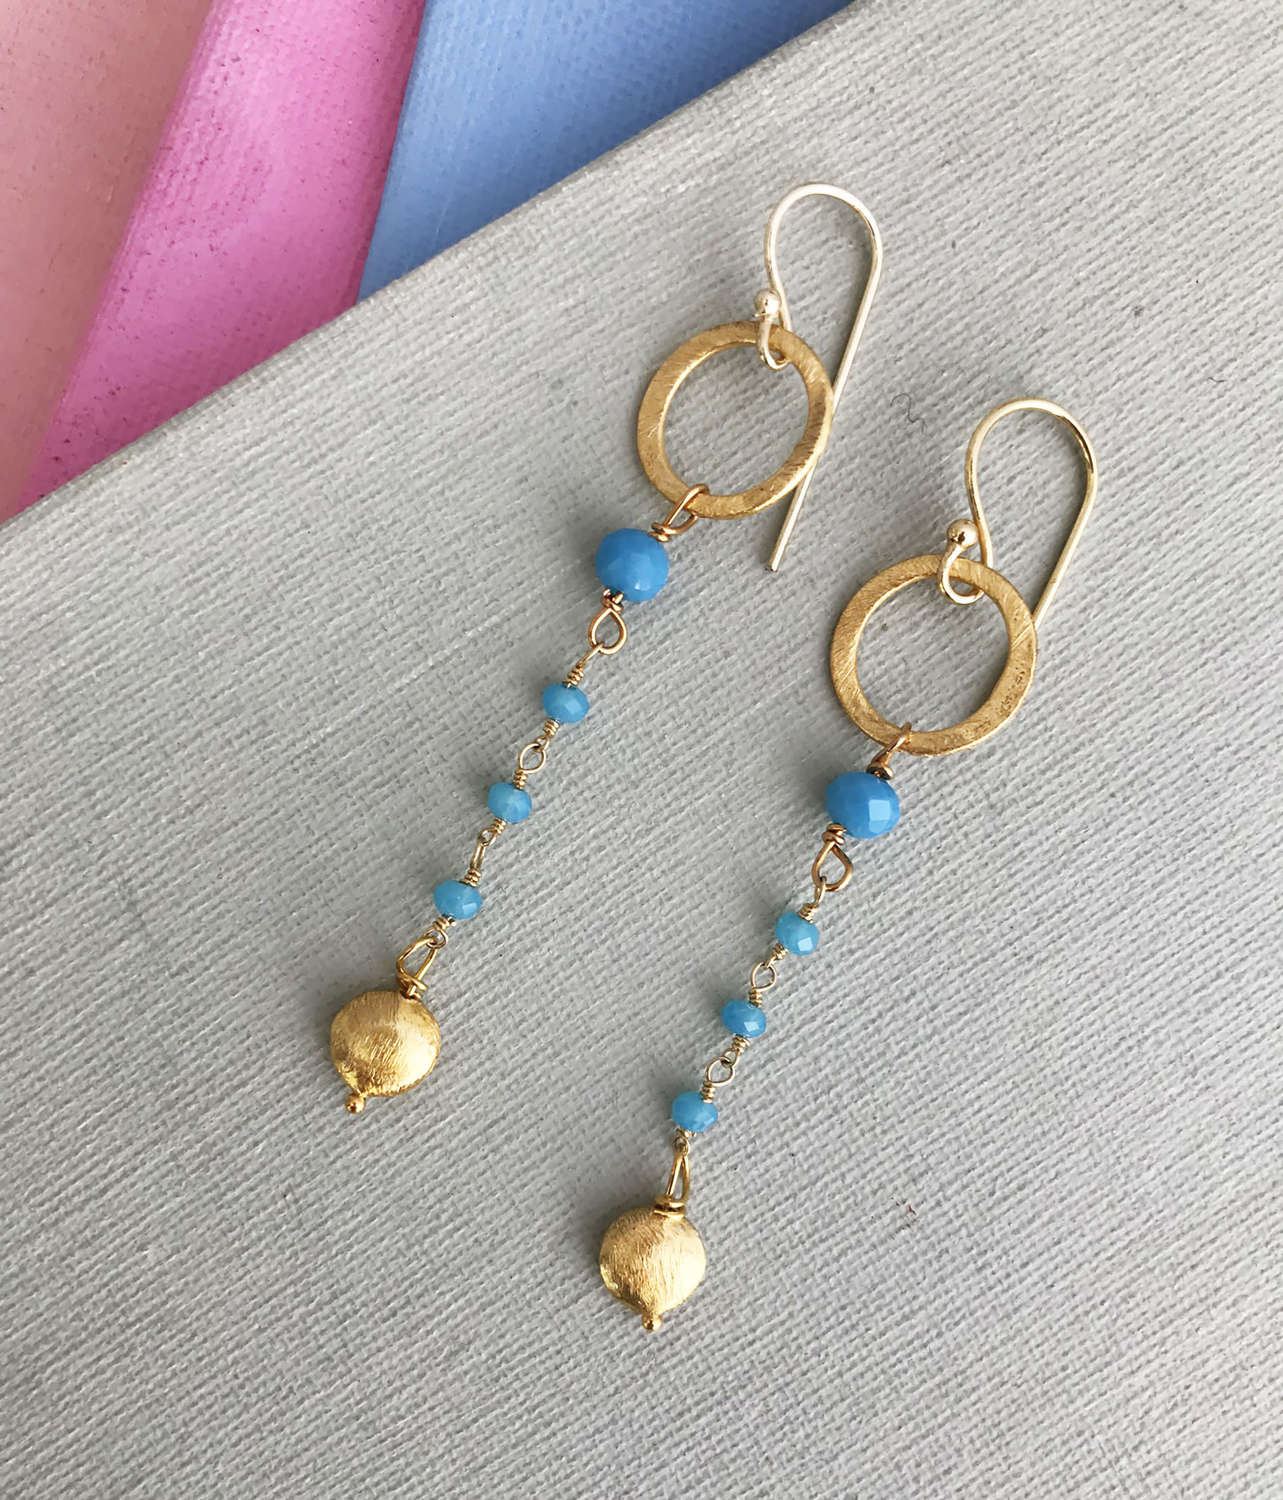 Downton turquoise/gold earrings